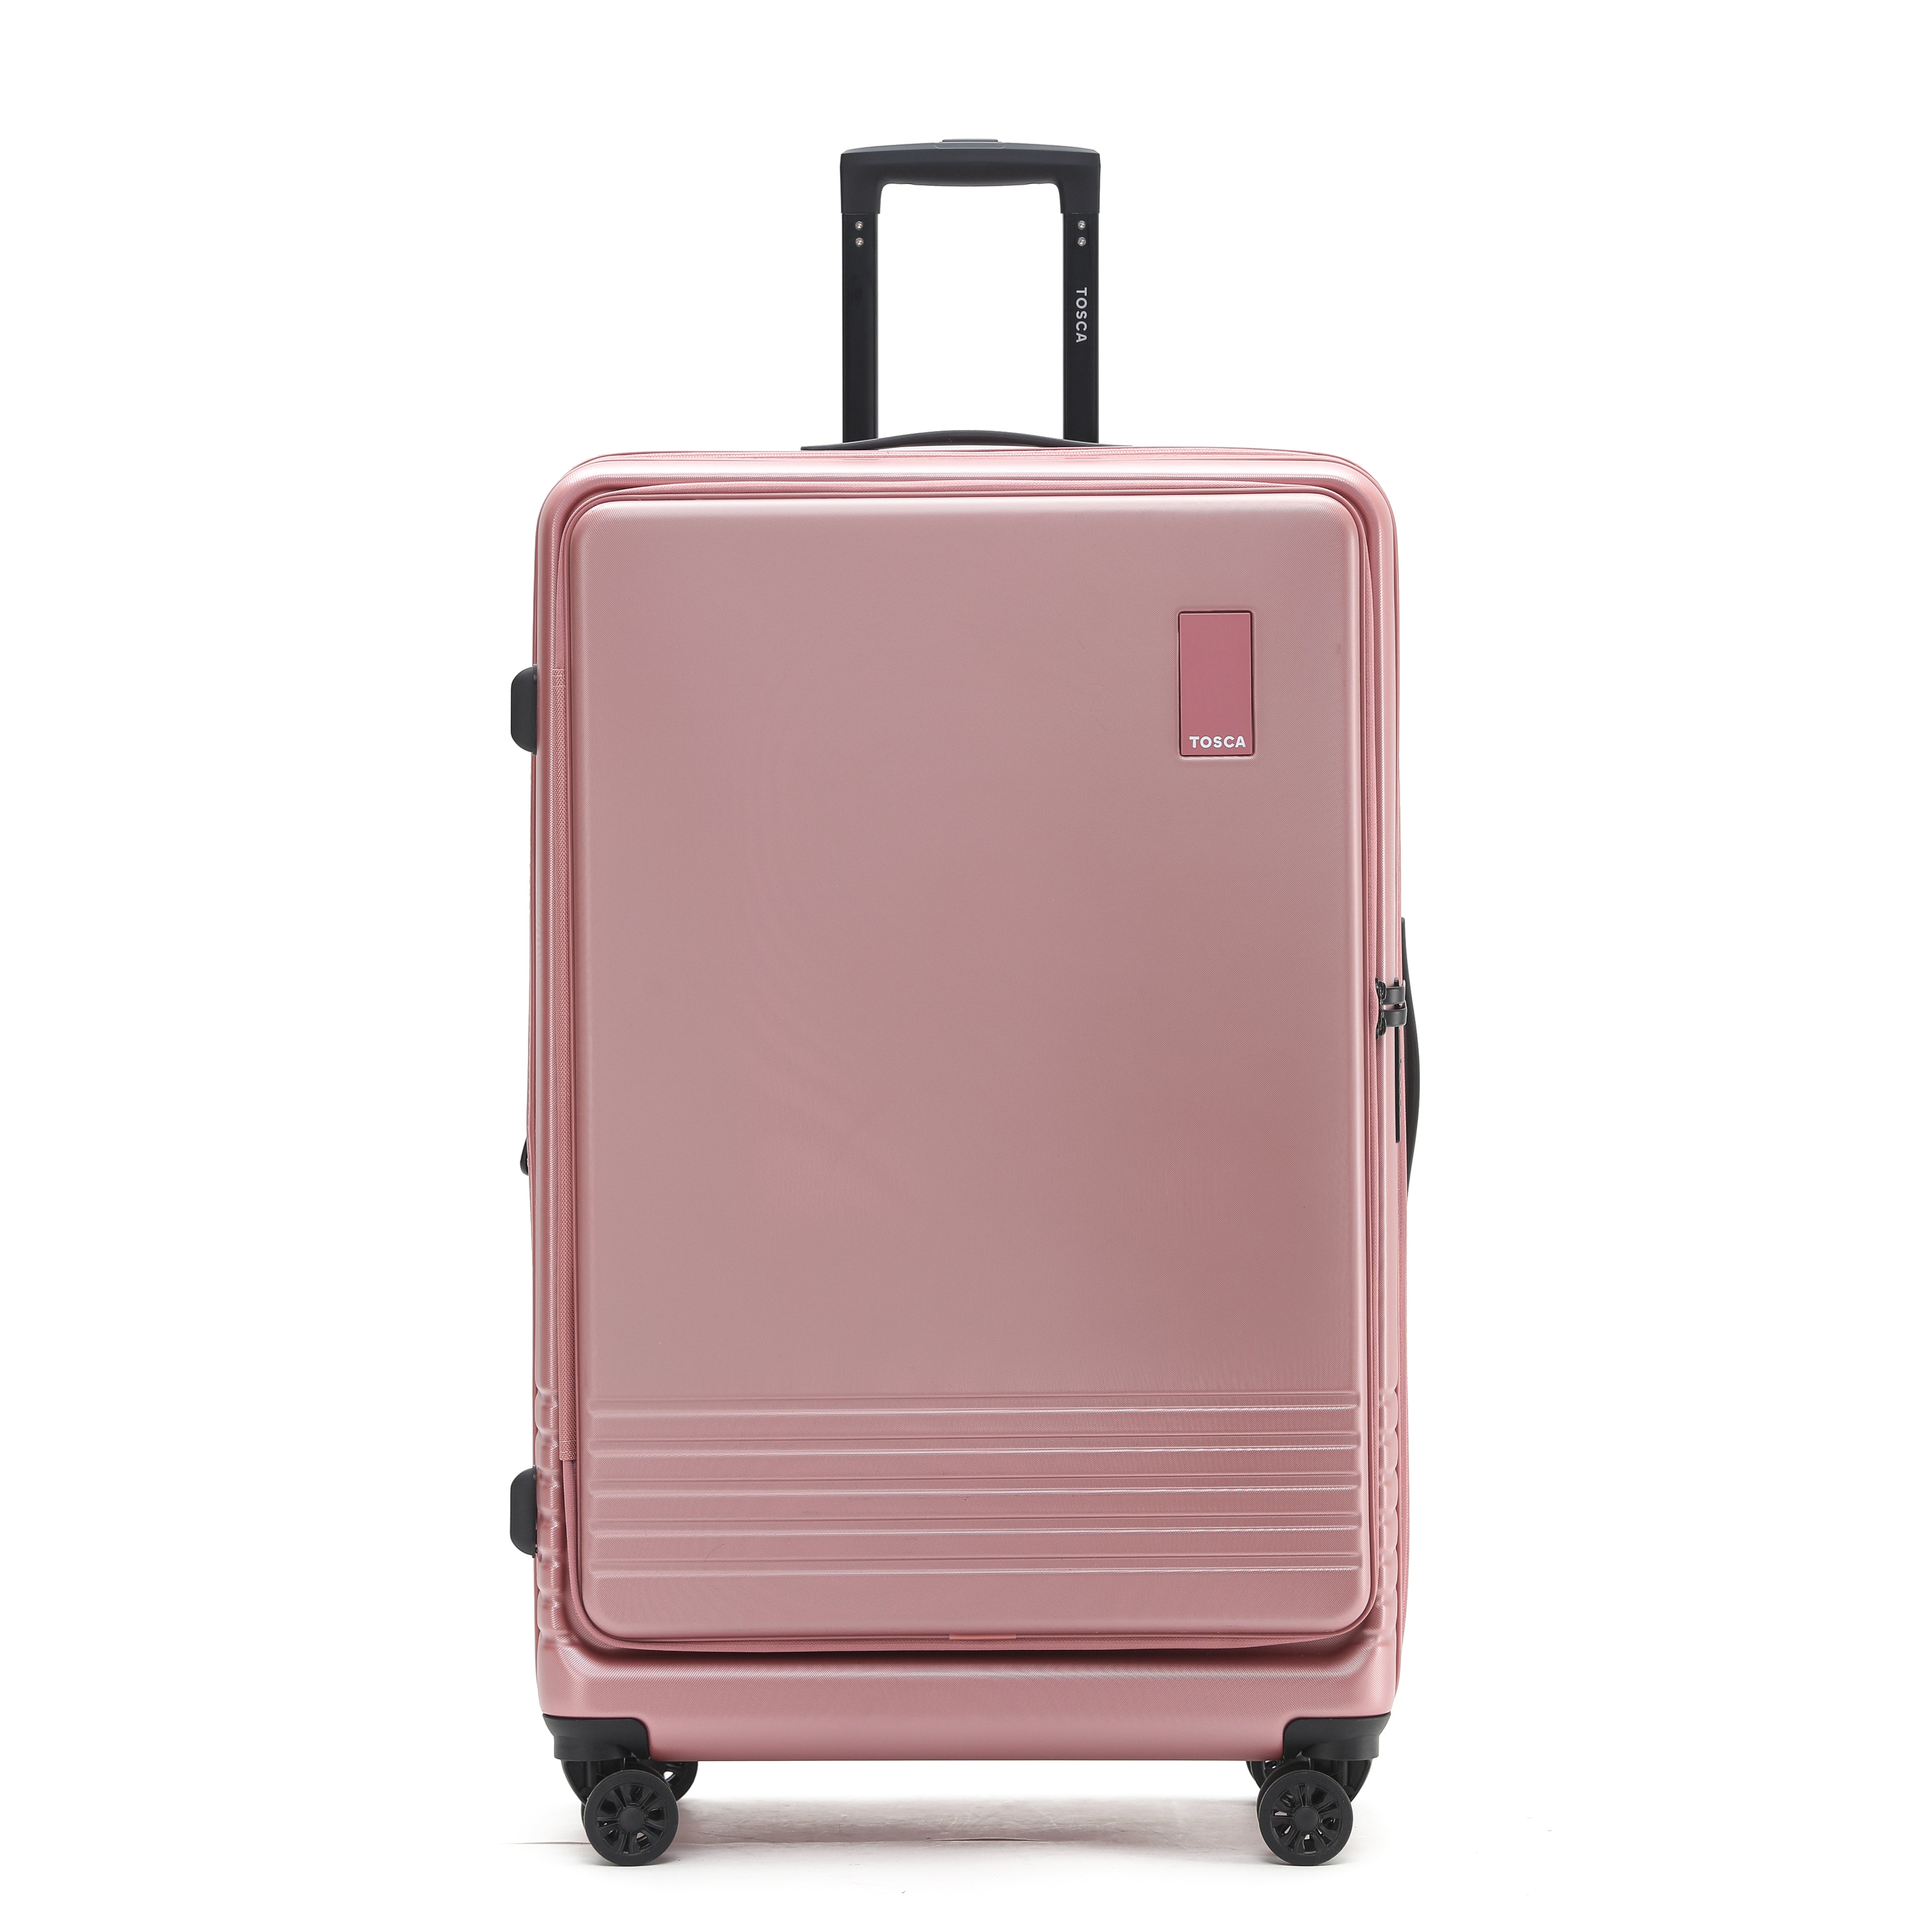 Tosca - TCA644 Horizon Front lid opening Set of 3 suitcases - Dusty Rose-4